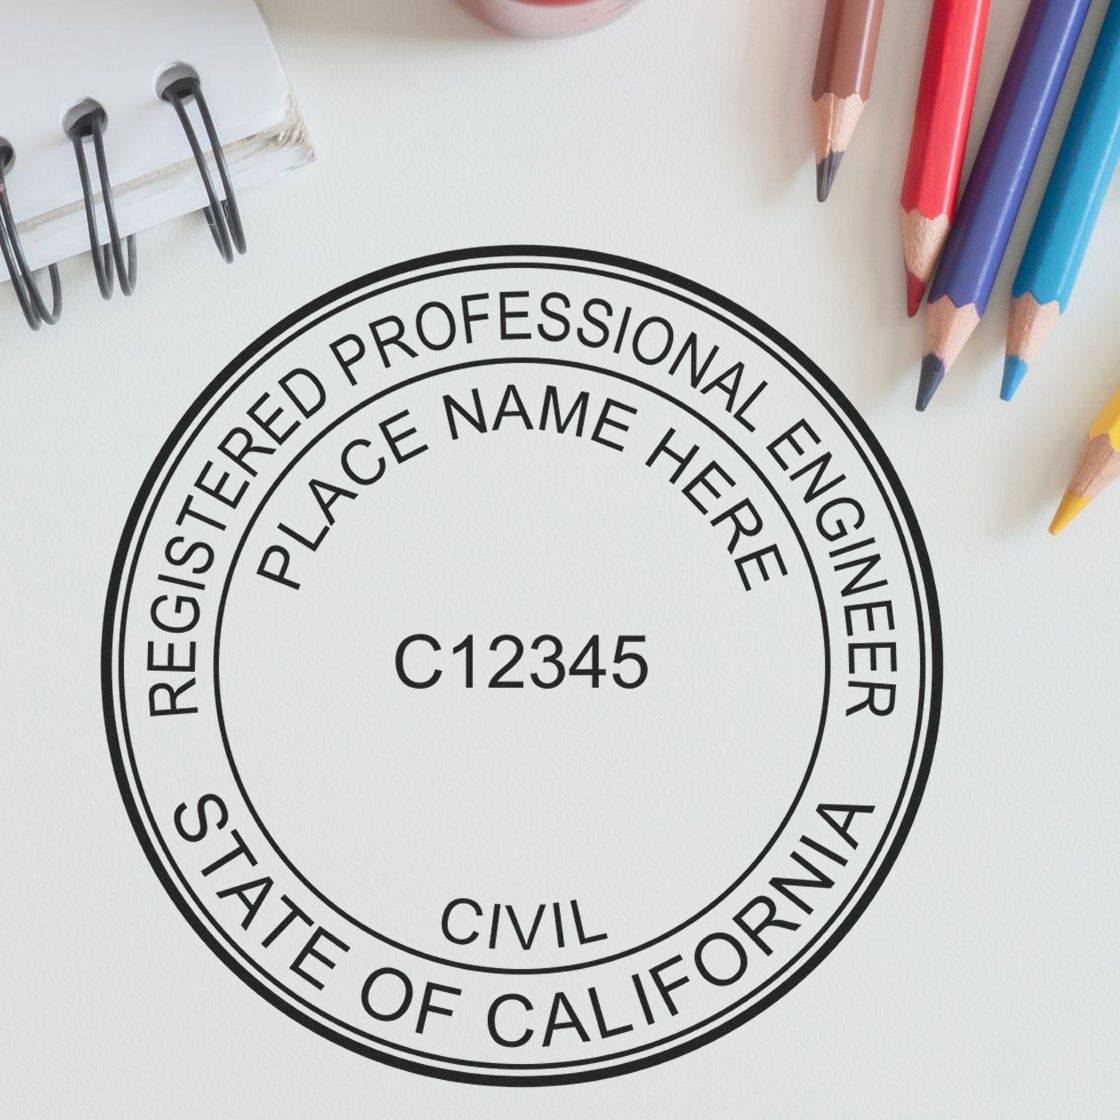 A lifestyle photo showing a stamped image of the Digital California PE Stamp and Electronic Seal for California Engineer on a piece of paper